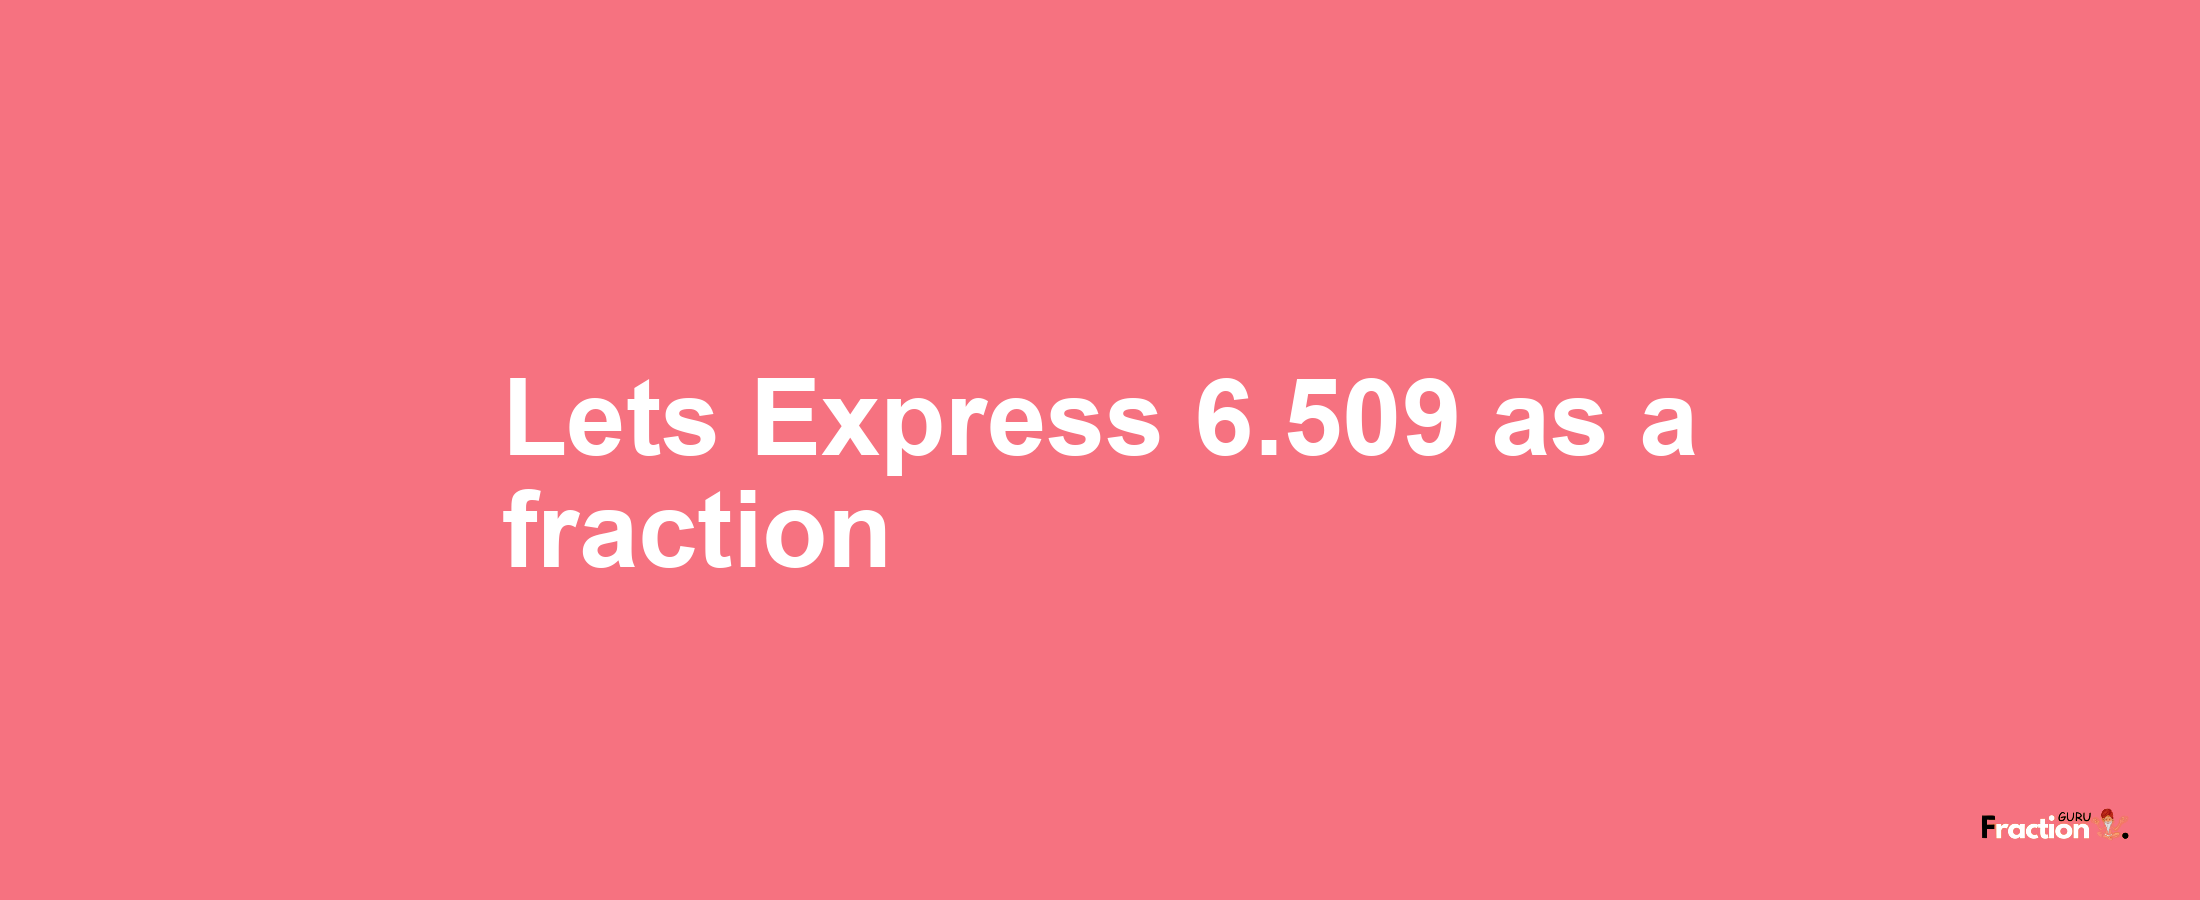 Lets Express 6.509 as afraction